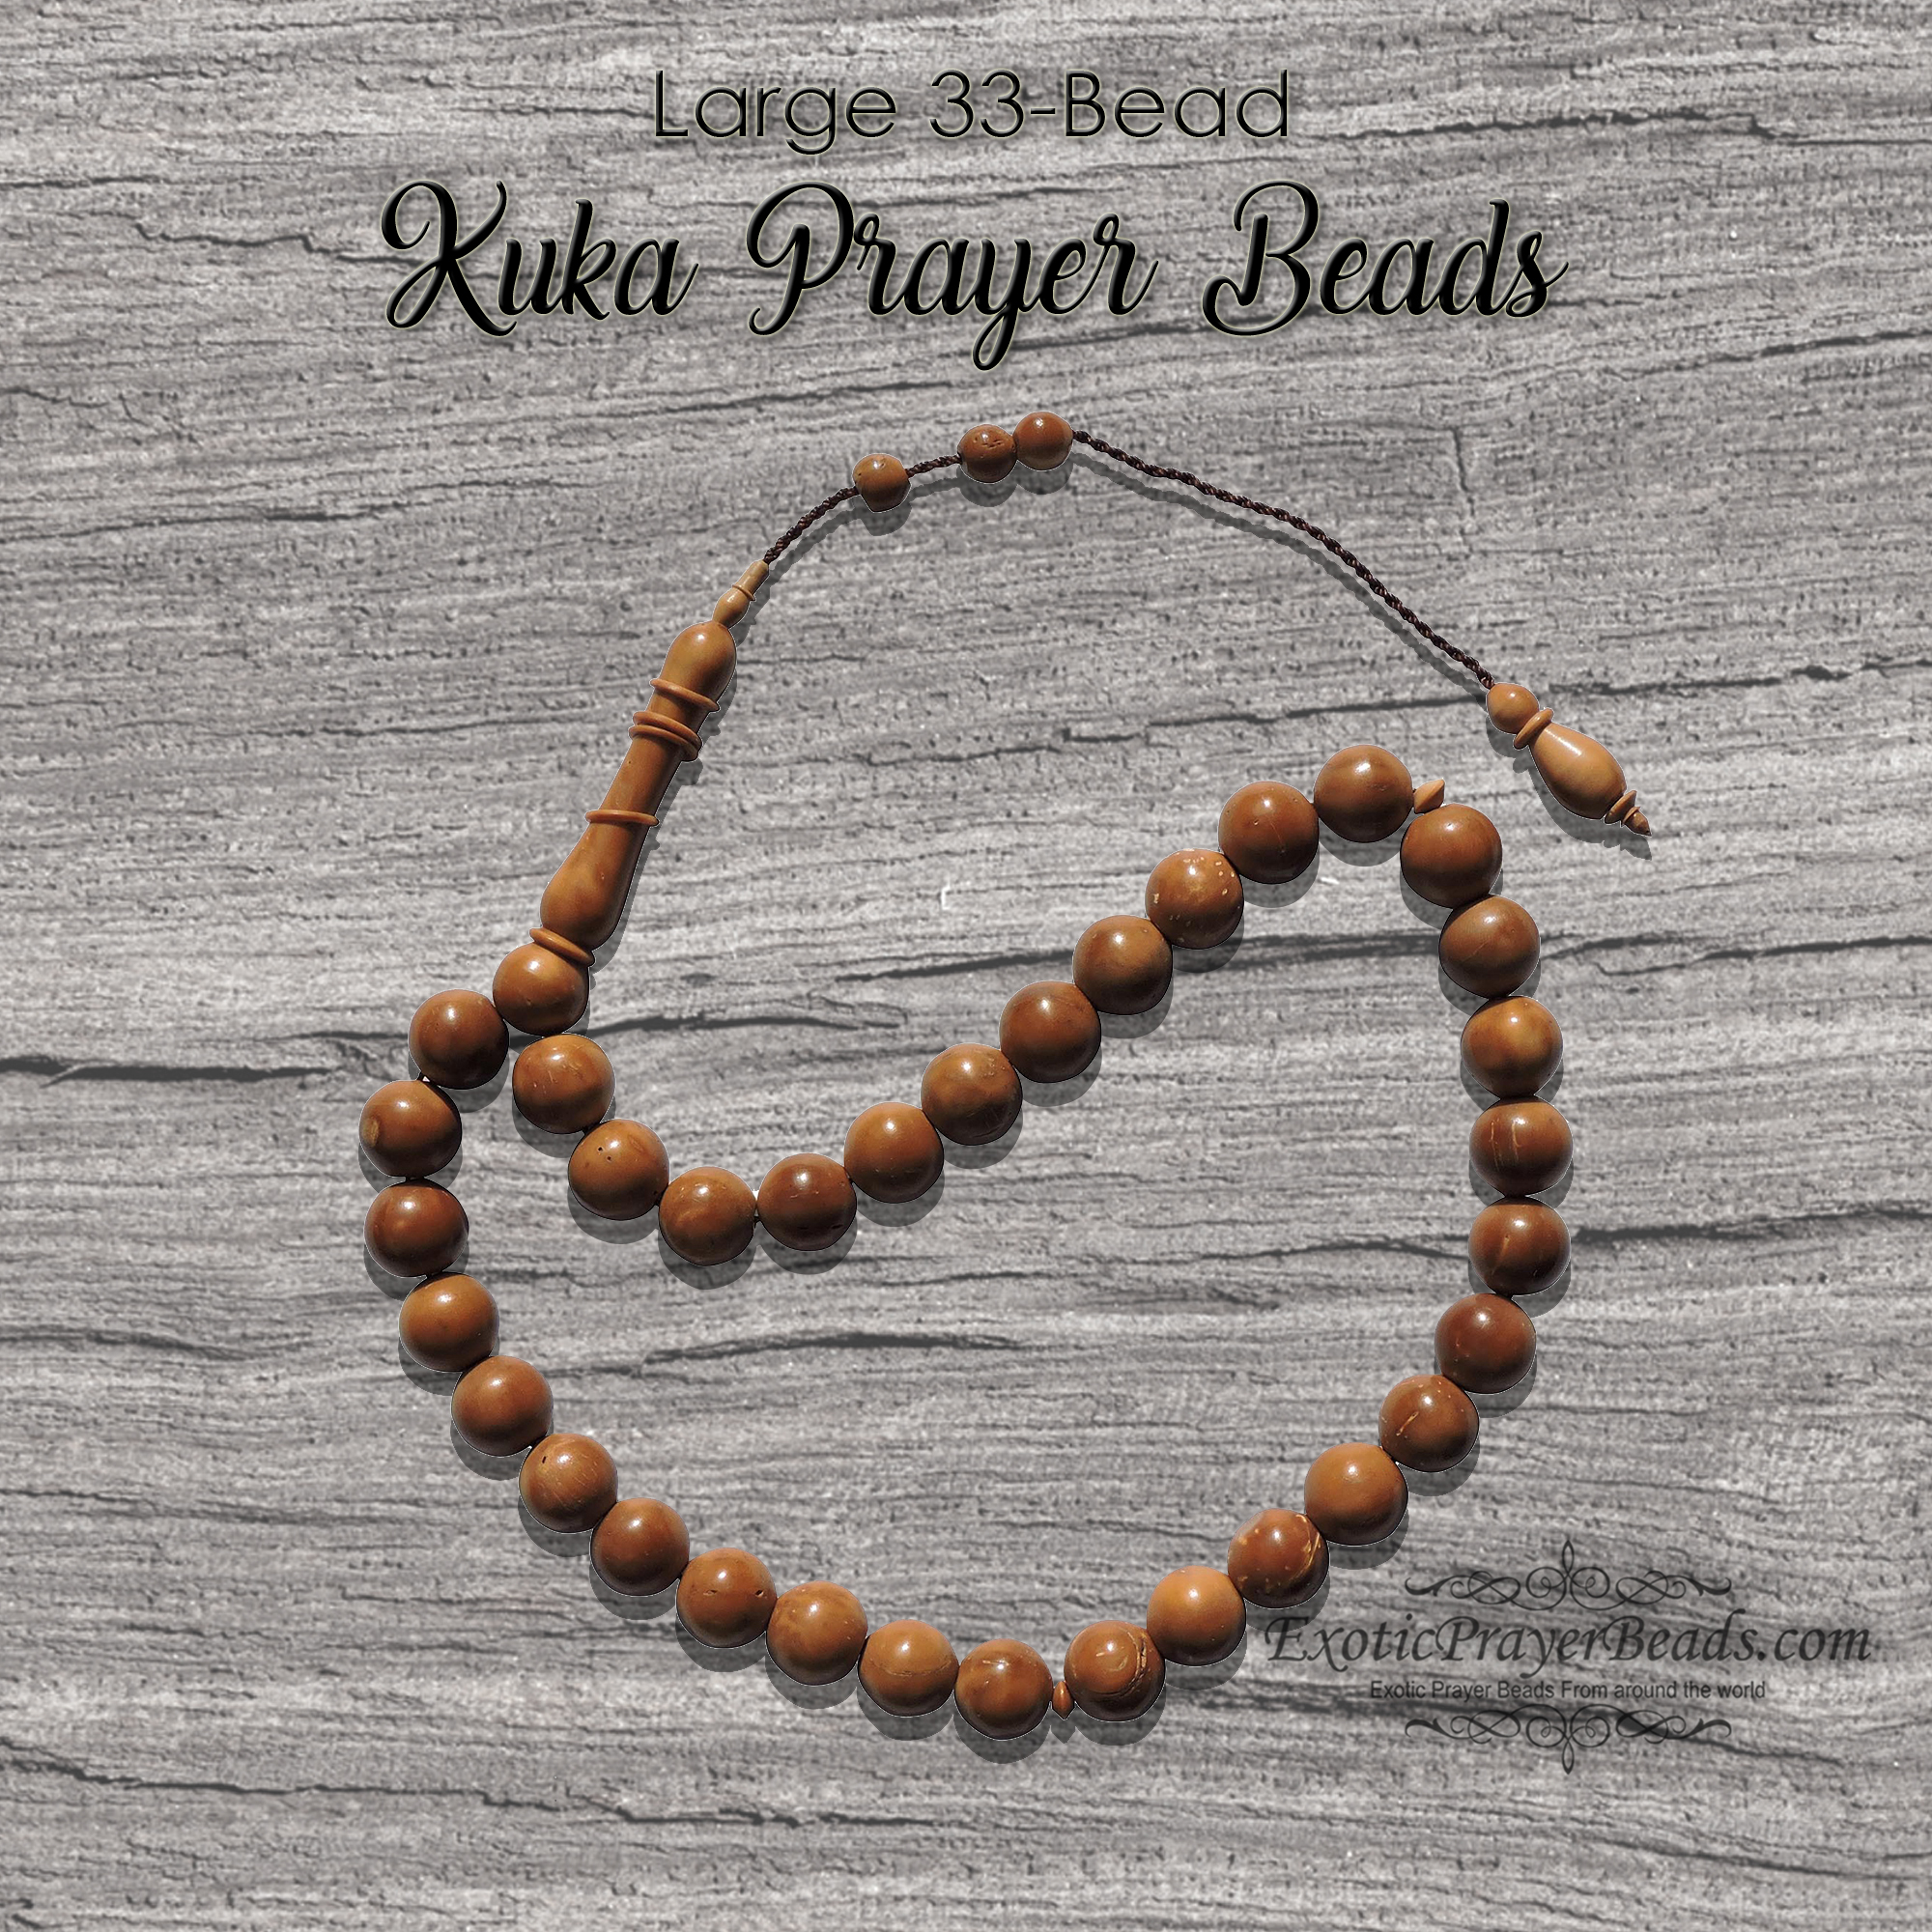 Natural color Kuka Prayer Beads - 10mm with Ornamental Alif